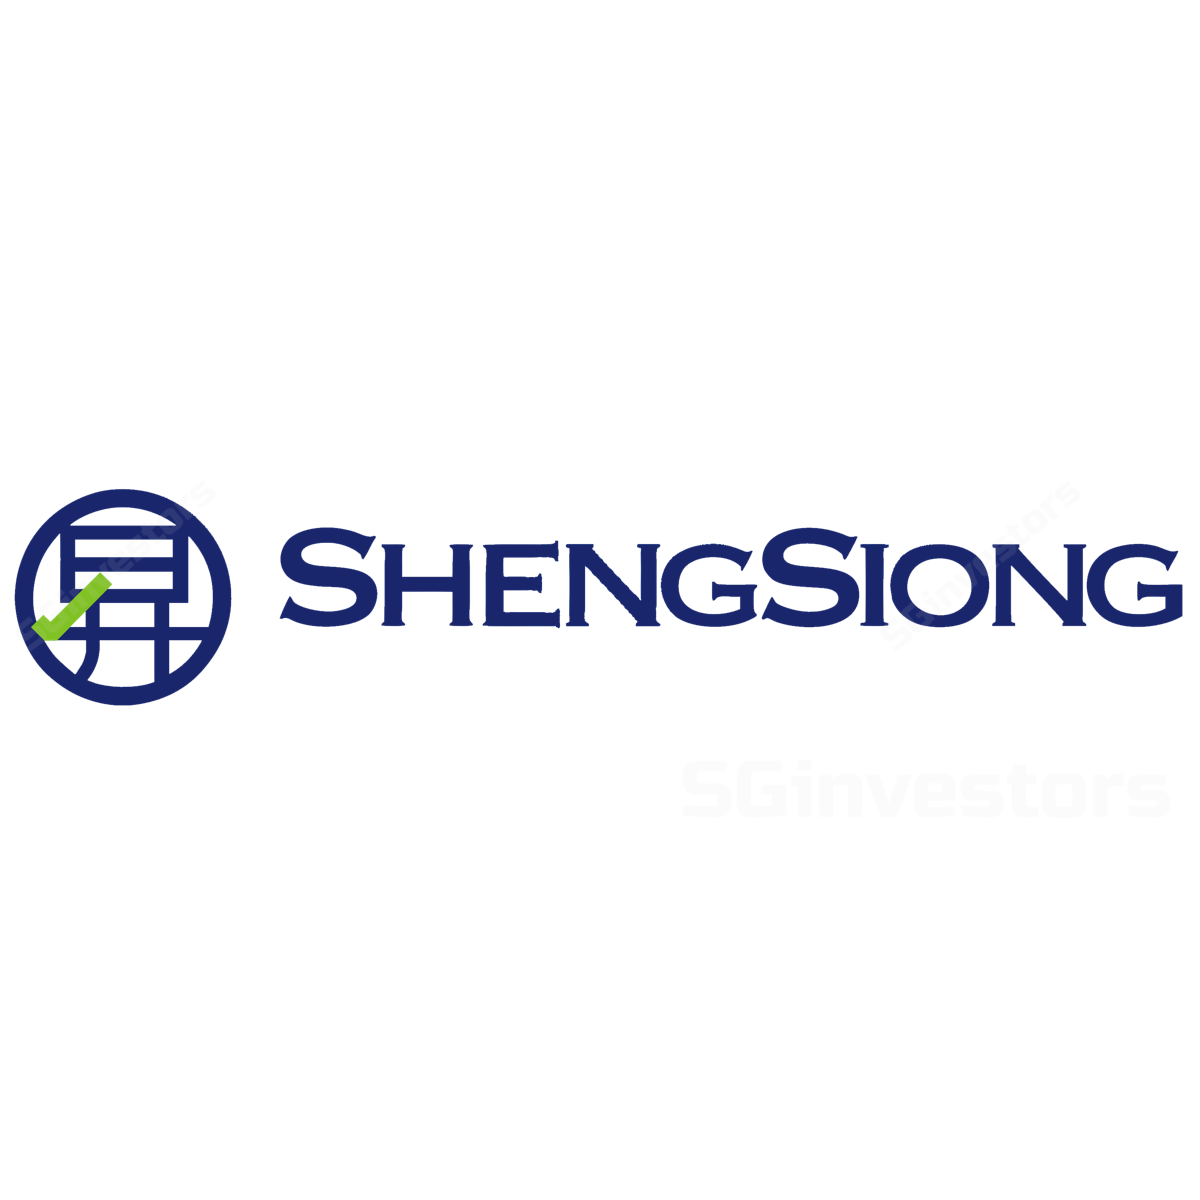 Sheng Siong Group - DBS Group Research Research 2018-07-31: Growth Momentum Intact